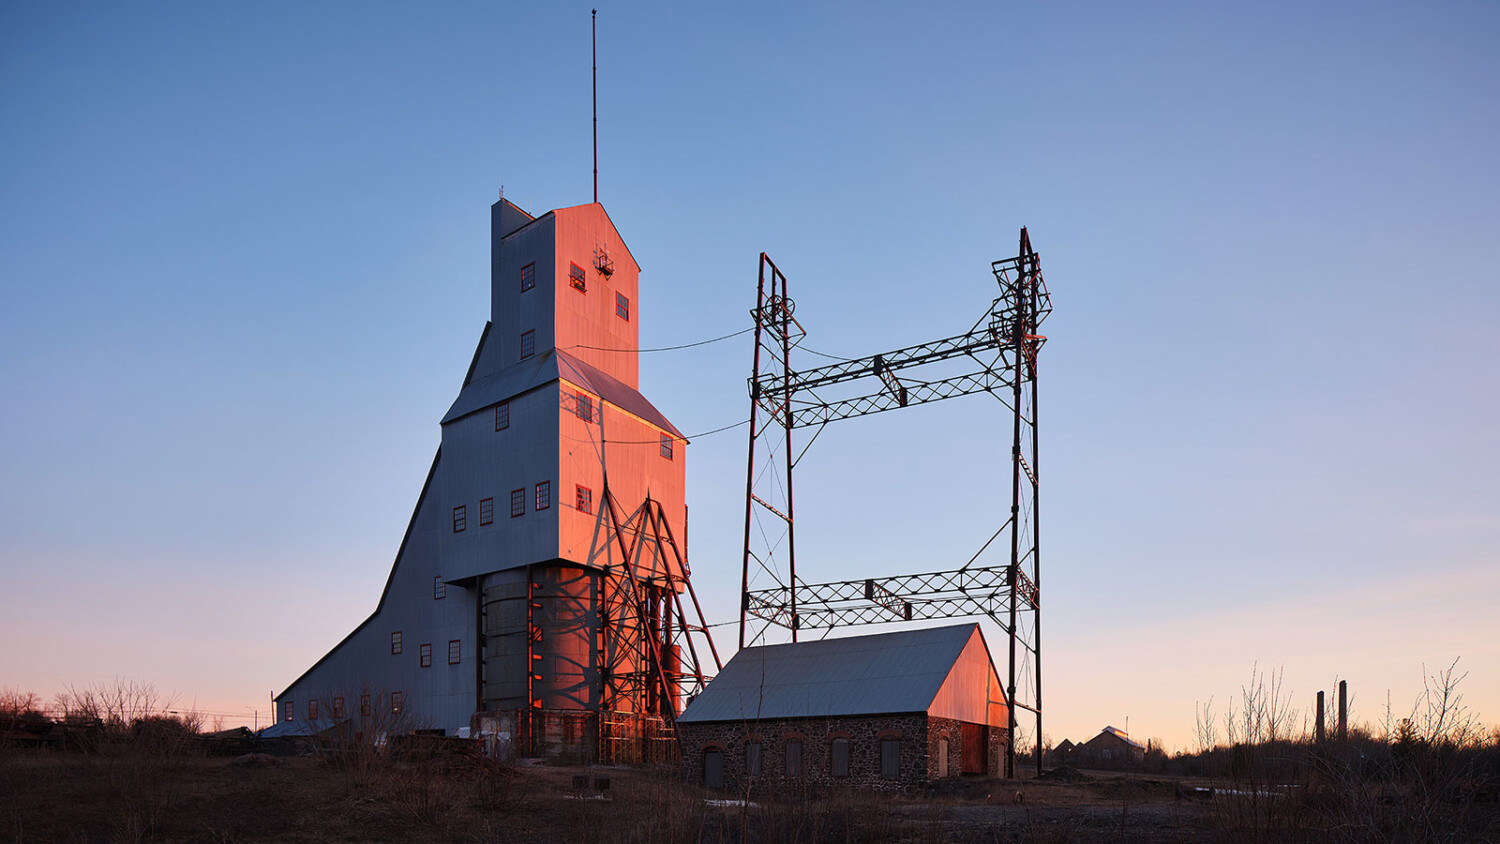 Exploring the Industrialness of American Vernacular Architecture With Tom Harris